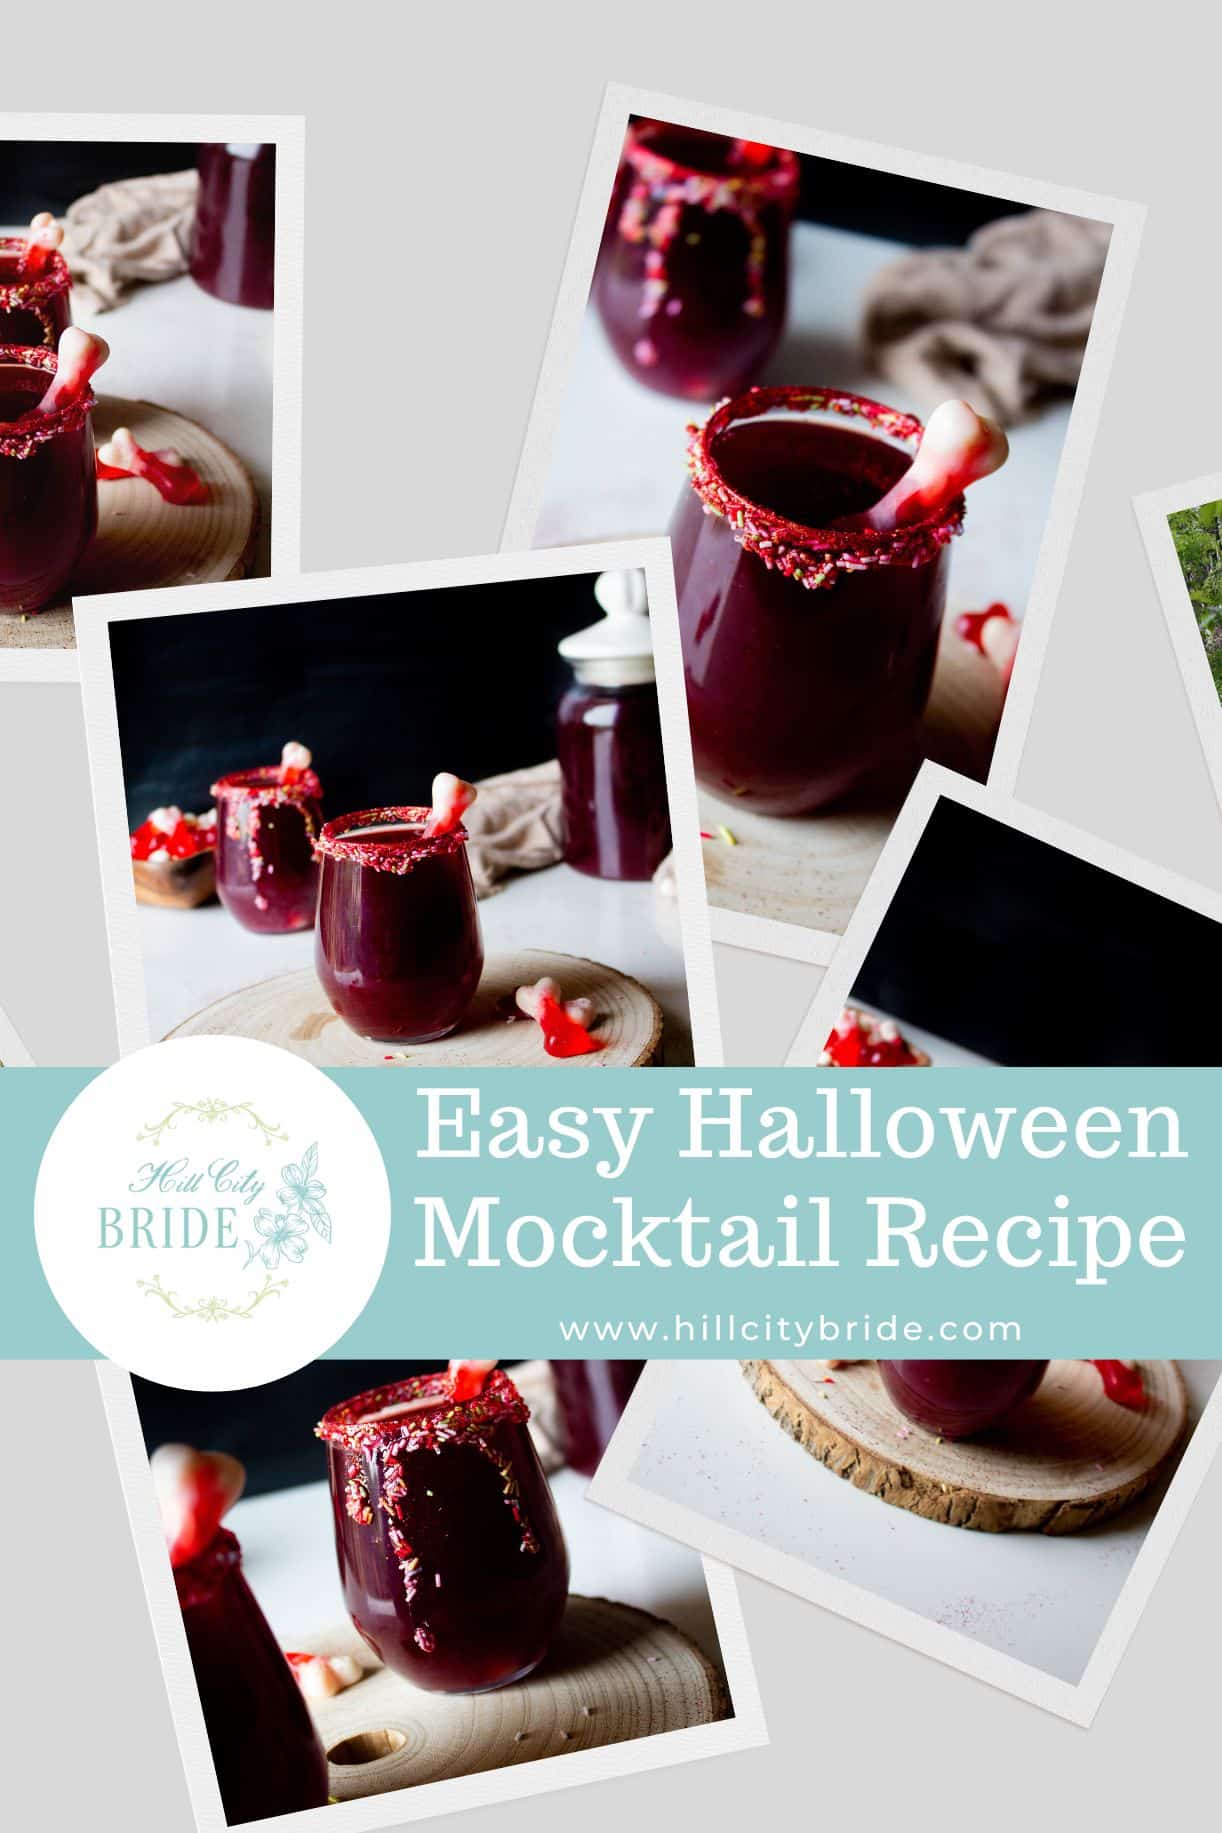 How to Make an Easy Halloween Mocktail